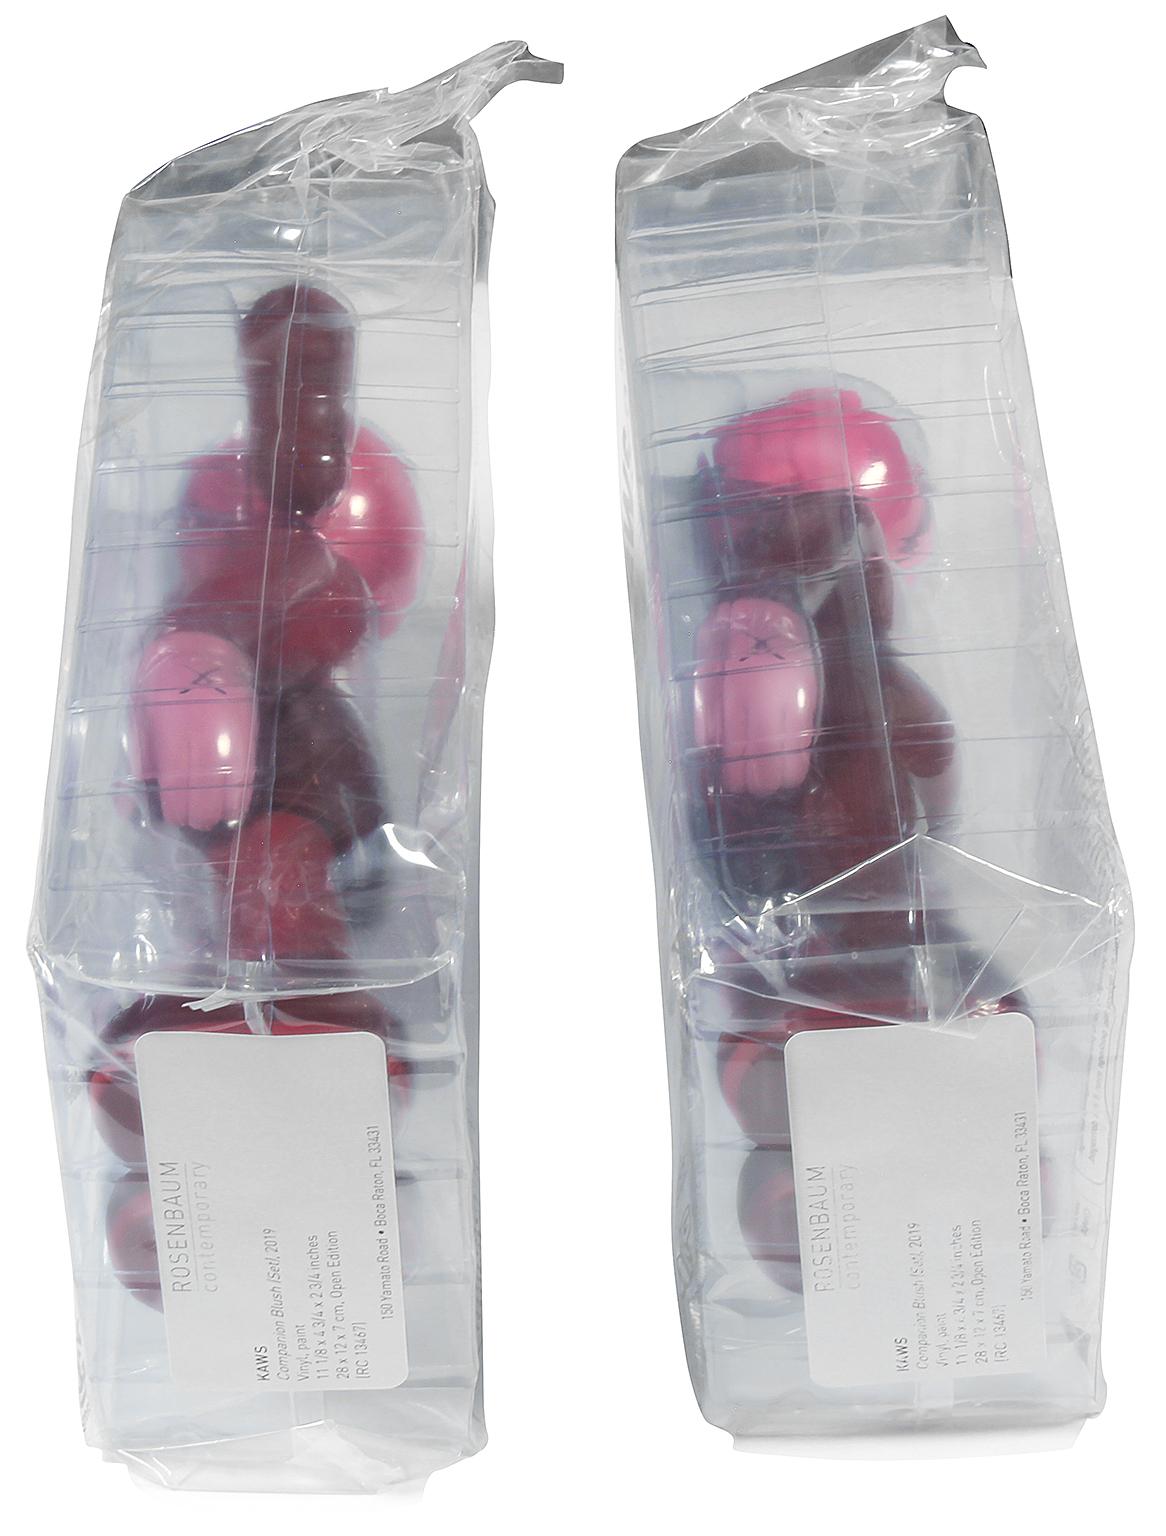 2019 Companion Blush Set of two vinyl figures by KAWS from Medicom Toy Corp.  For Sale 1